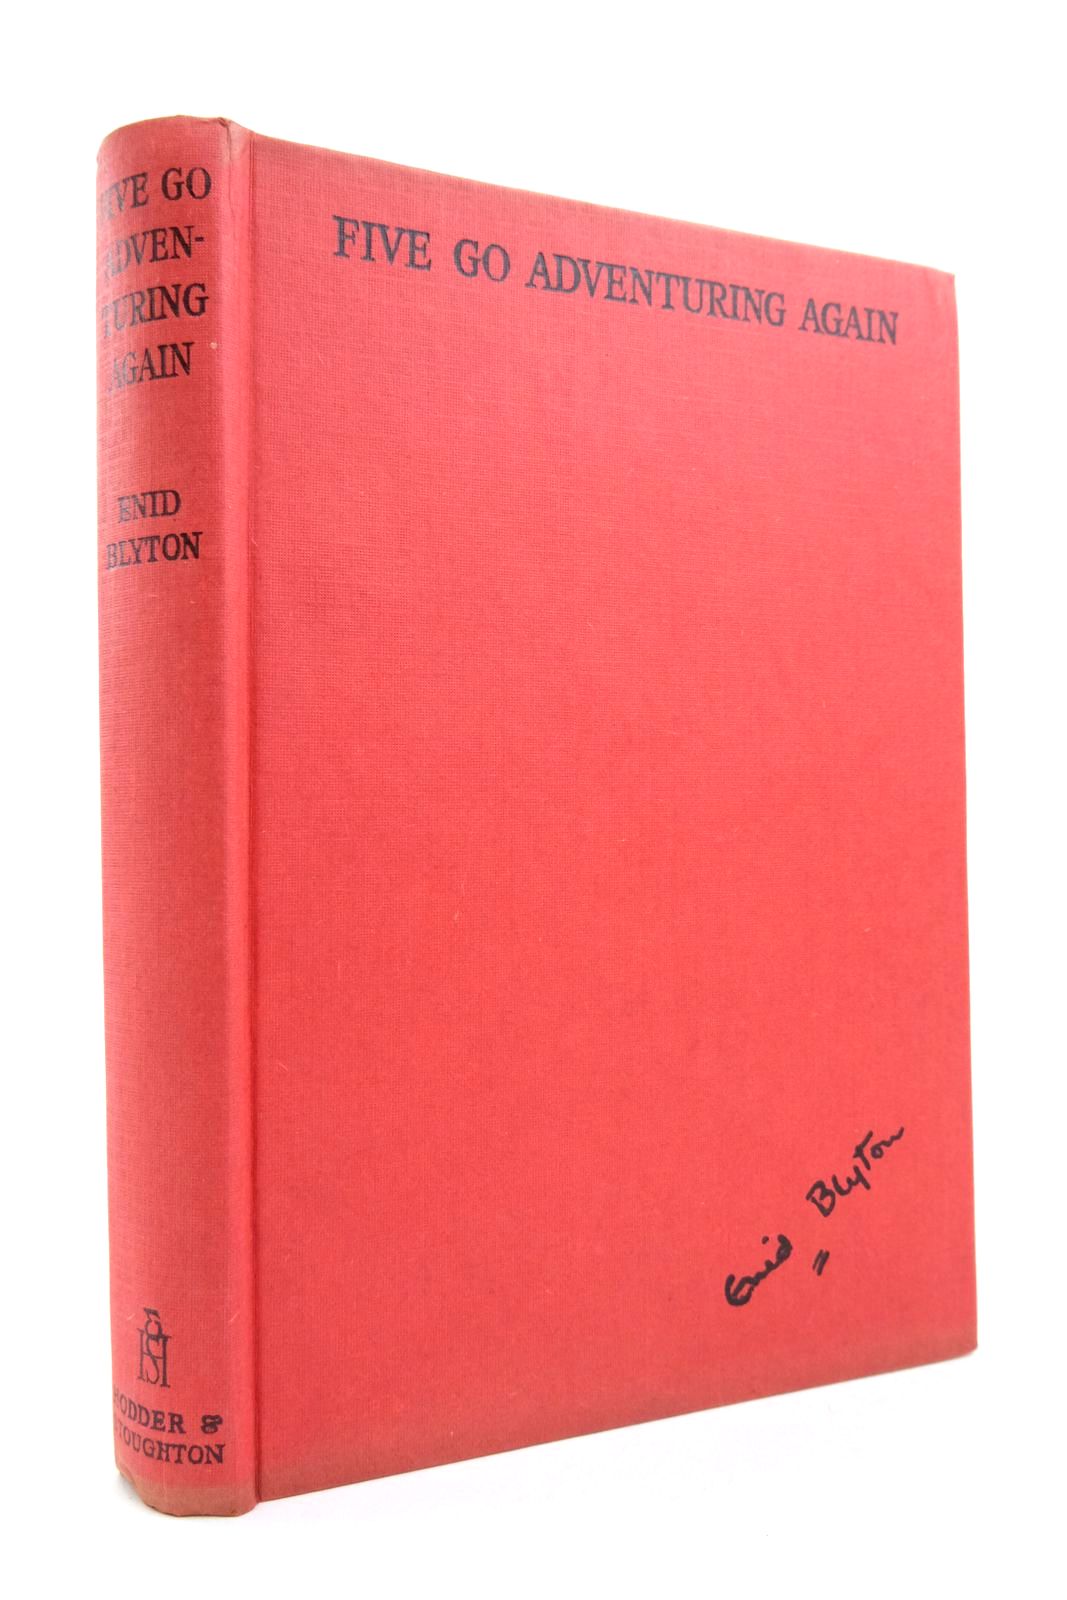 Photo of FIVE GO ADVENTURING AGAIN written by Blyton, Enid illustrated by Soper, Eileen published by Hodder & Stoughton (STOCK CODE: 2136913)  for sale by Stella & Rose's Books